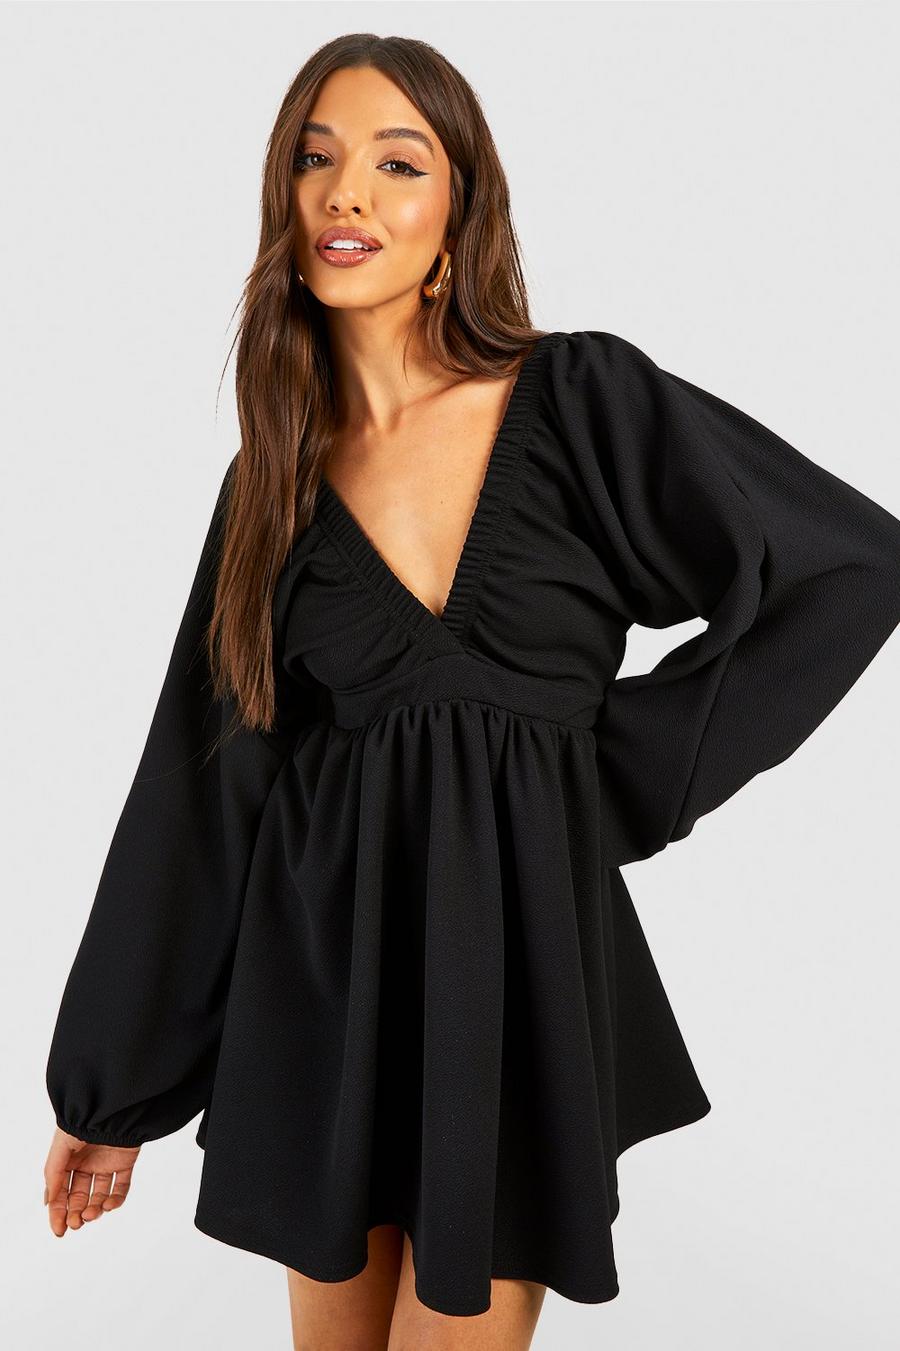 Rouched Batwing Skater Dress